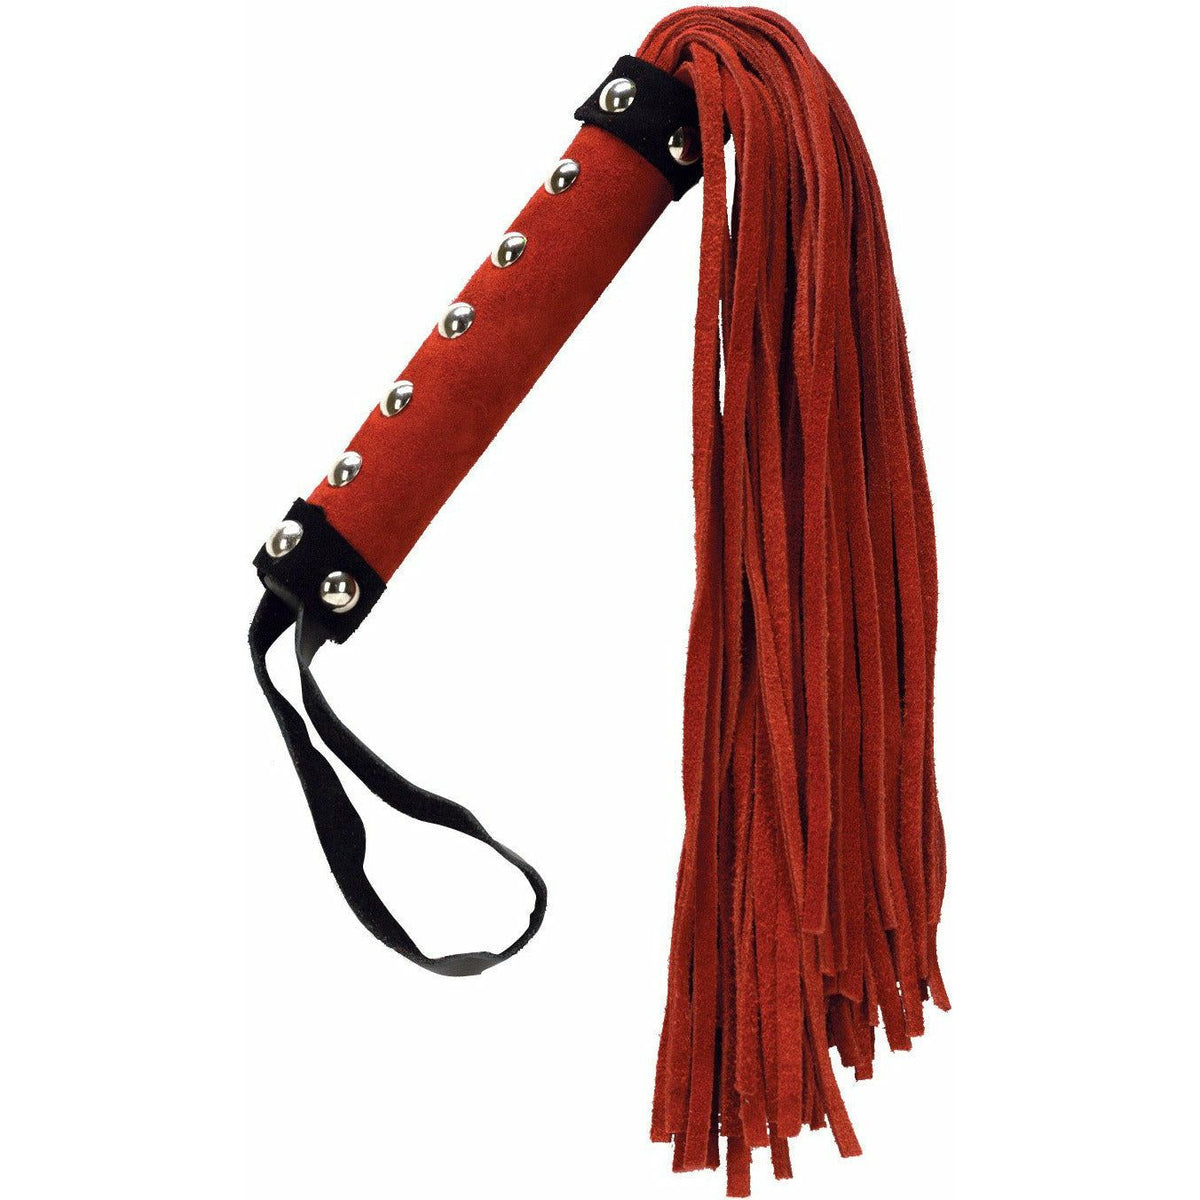 Punishment Large Whip with Studs - Red